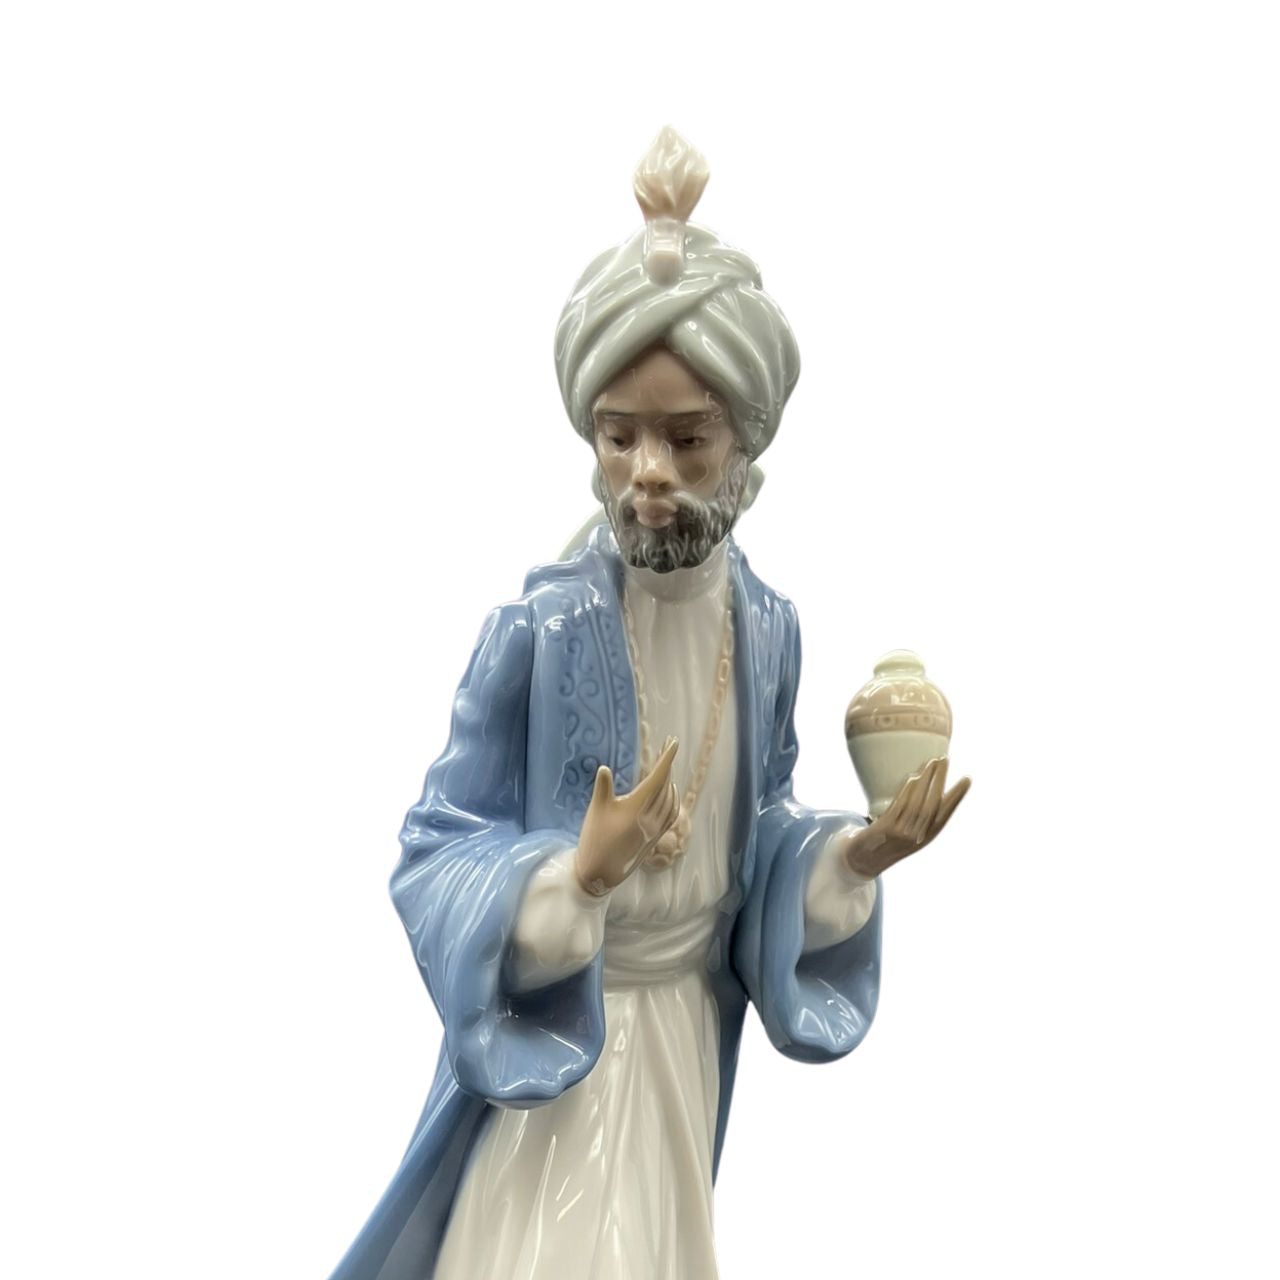 Nao by Lladro King Balthasar with Jug Wisemen  Nao porcelain figurine “King Balthasar with Jug” from the Christmas Collection.  Sculpted by Regino Torrijos, this figurine is part of the nativity set.